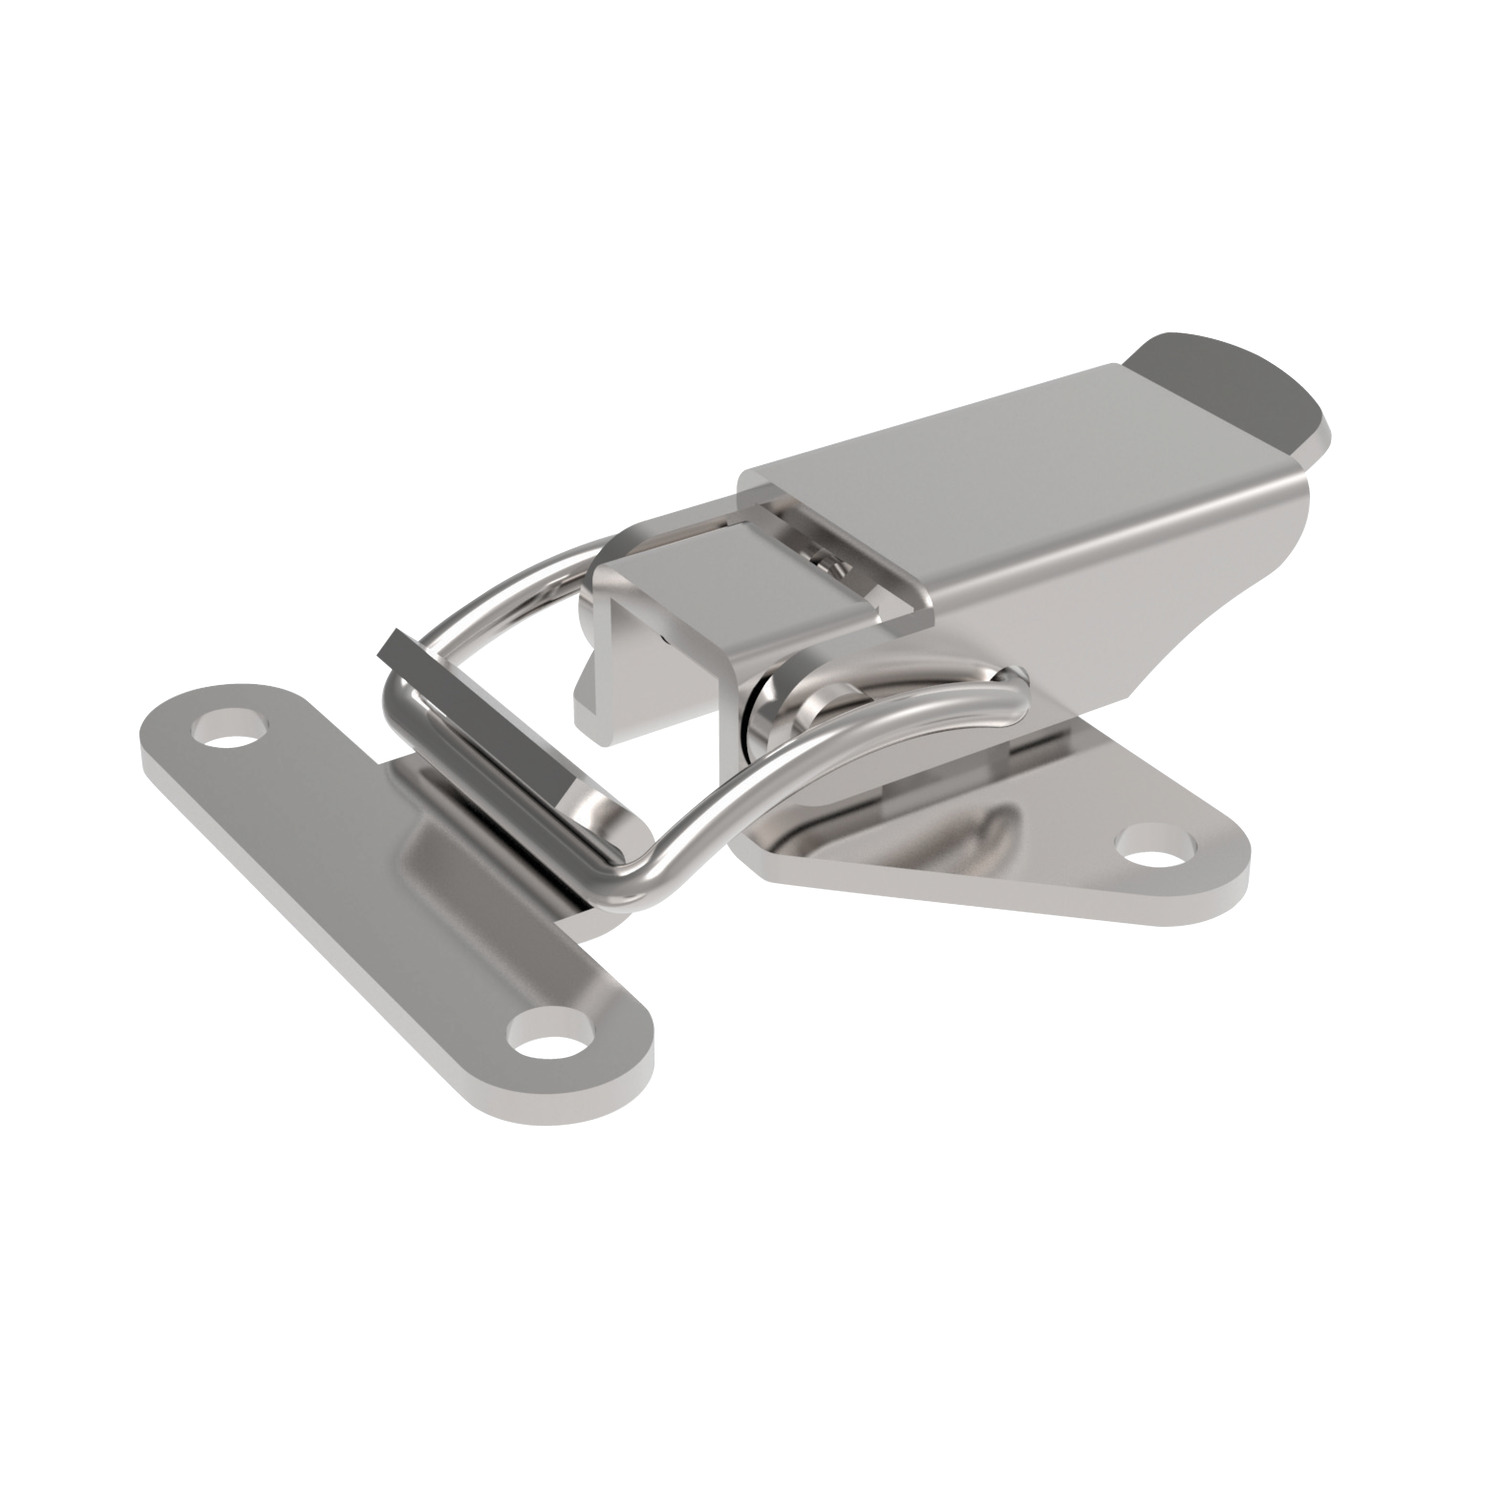 Toggle Latches A small strong toggle latch with a simple mechanical action. Available in steel or stainless steel.